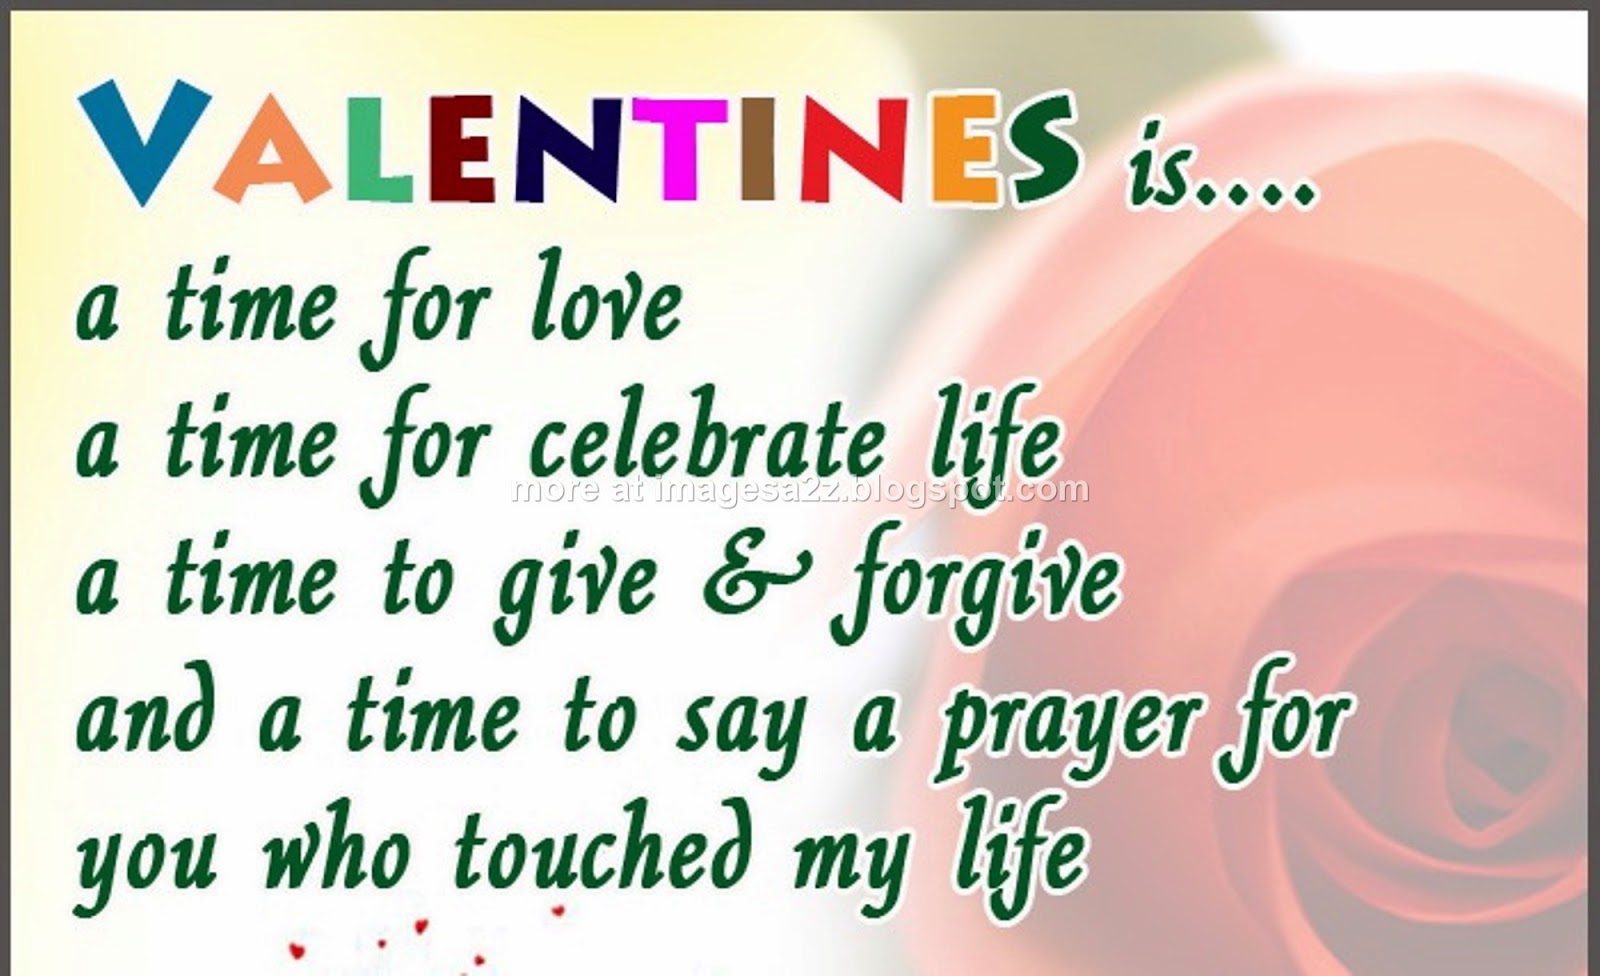 valentine's day 2014 wallpaper | lovers day | feb 14 - happy-birthday-wishes-quotes ...